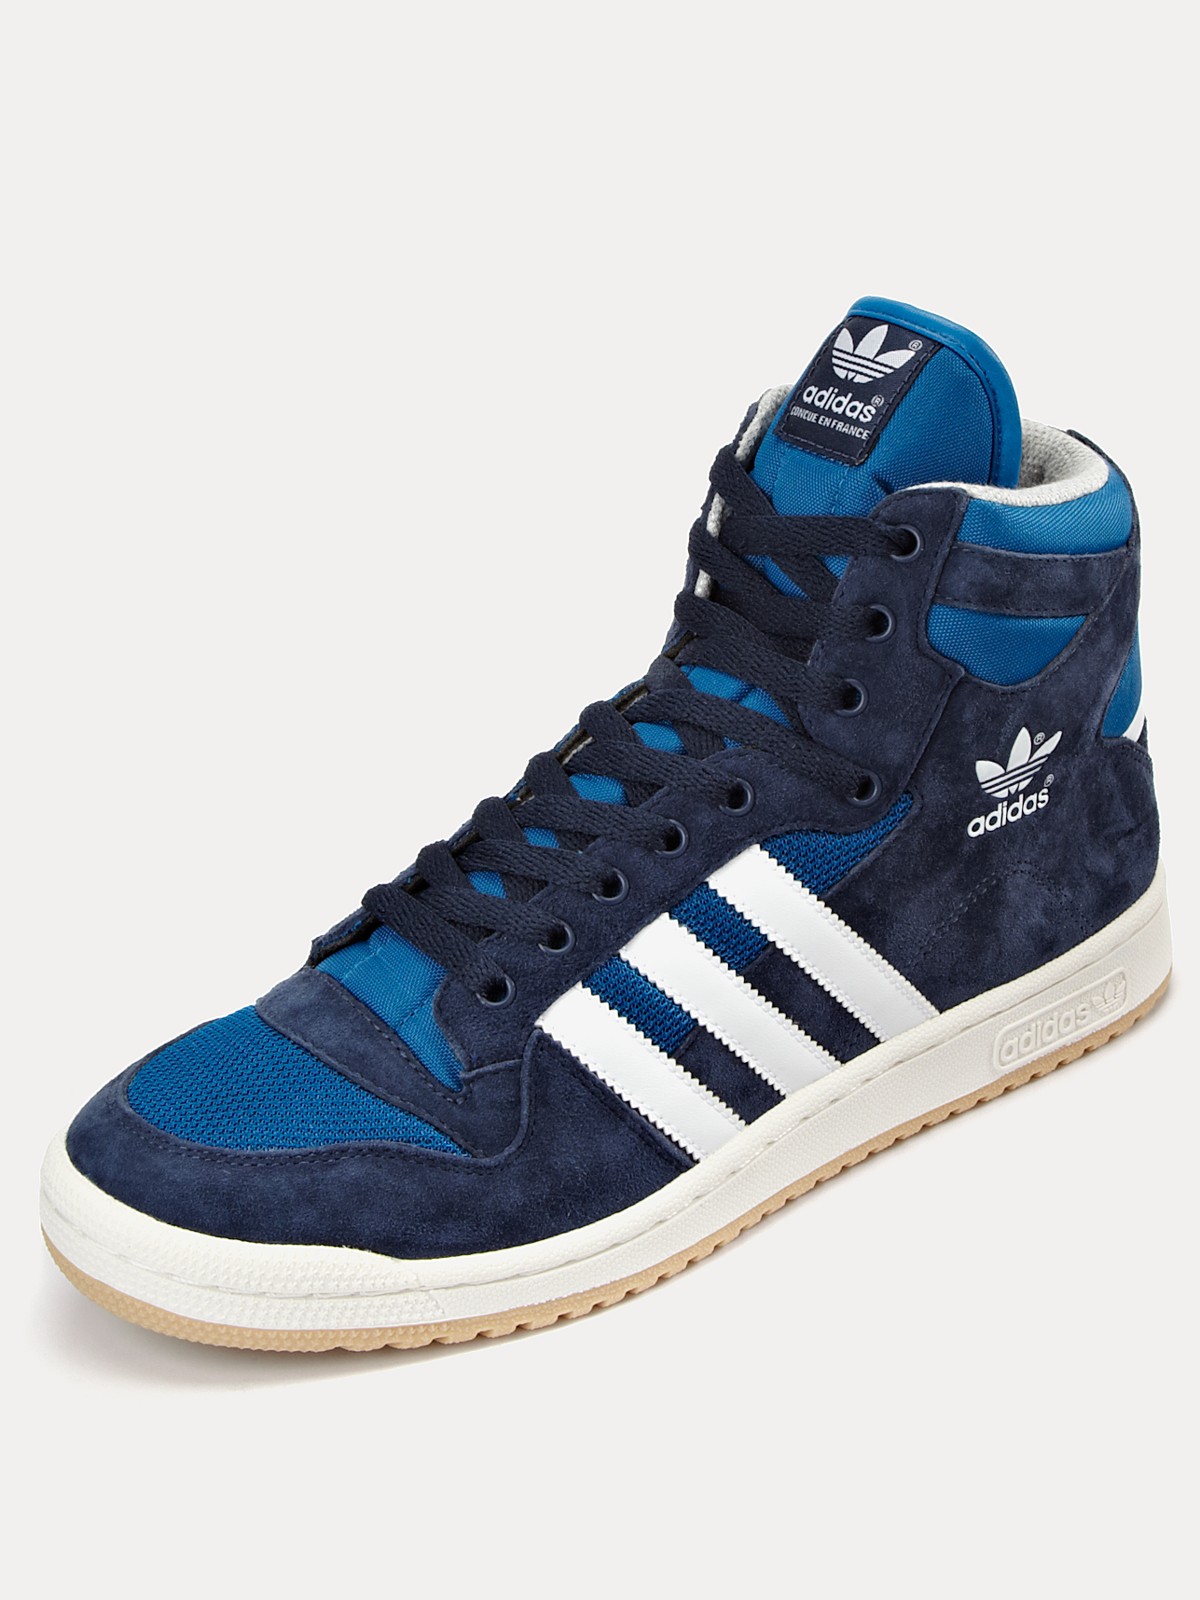 Adidas Adidas Originals Mens Decade Og Mid Trainers in Blue for Men (blue/white) | Lyst